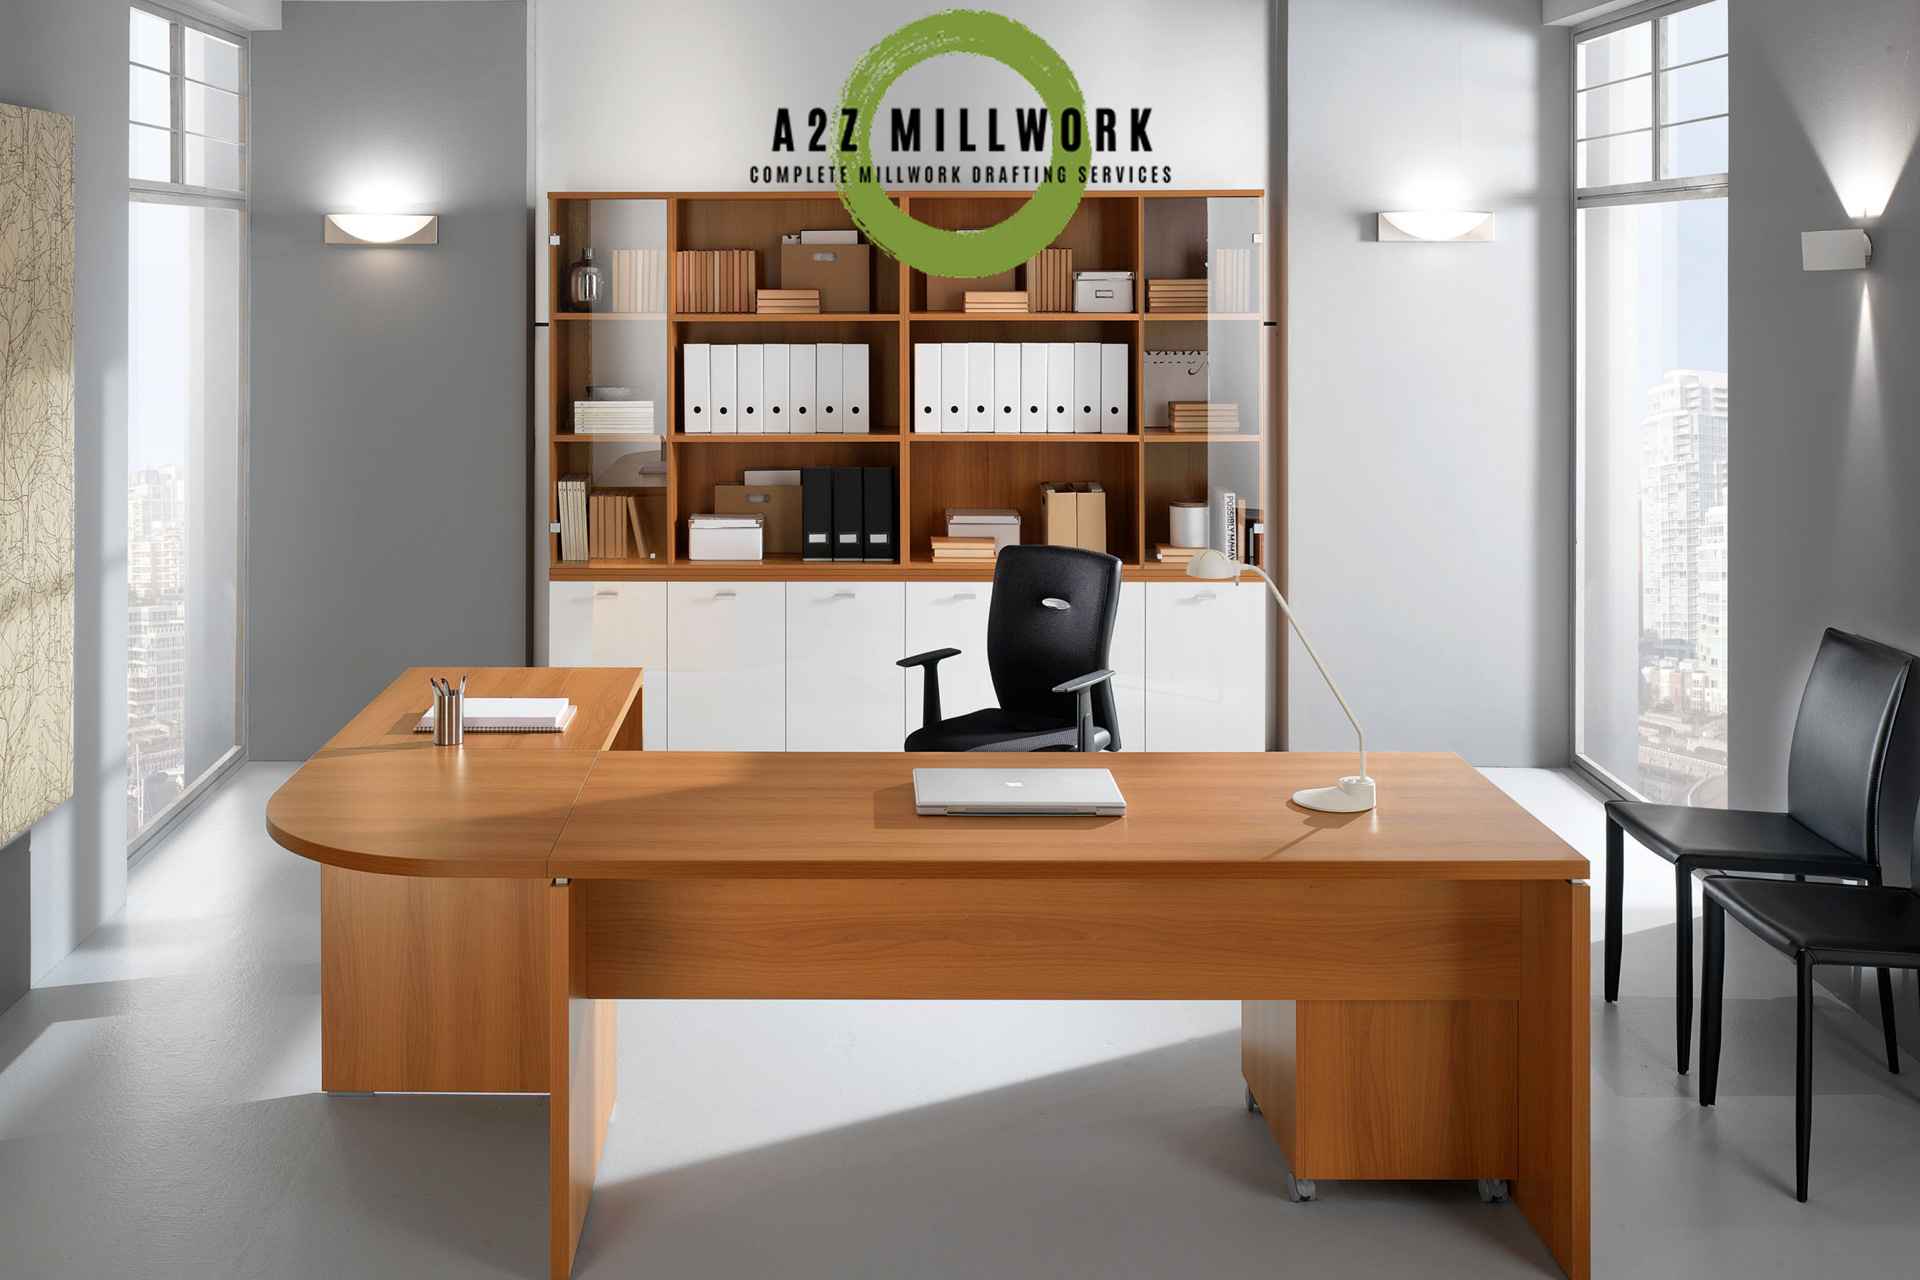 Millwork-in-Commercial-Spaces-pic